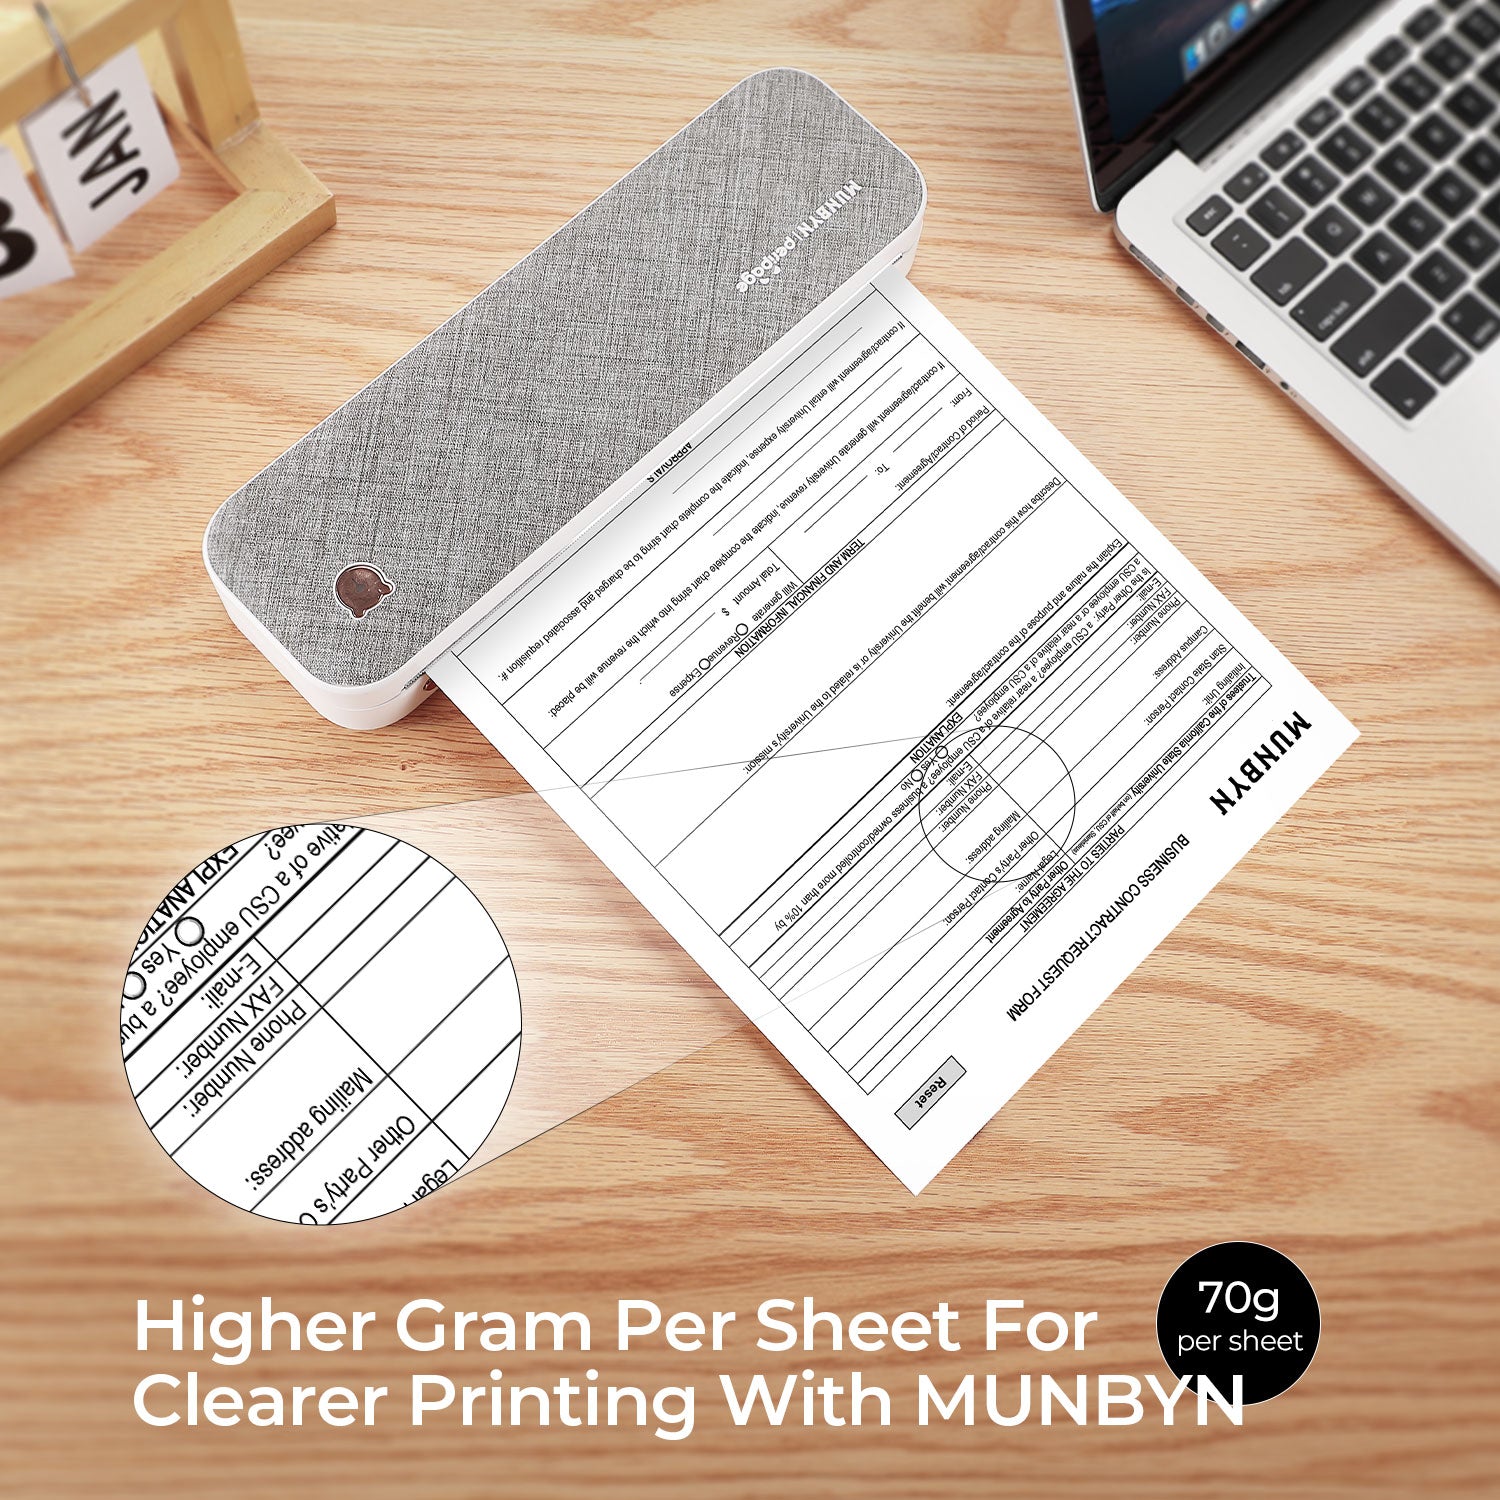 MUNBYN thermal paper roll offers clear and crisp printing results, making it ideal for producing highly legible text..